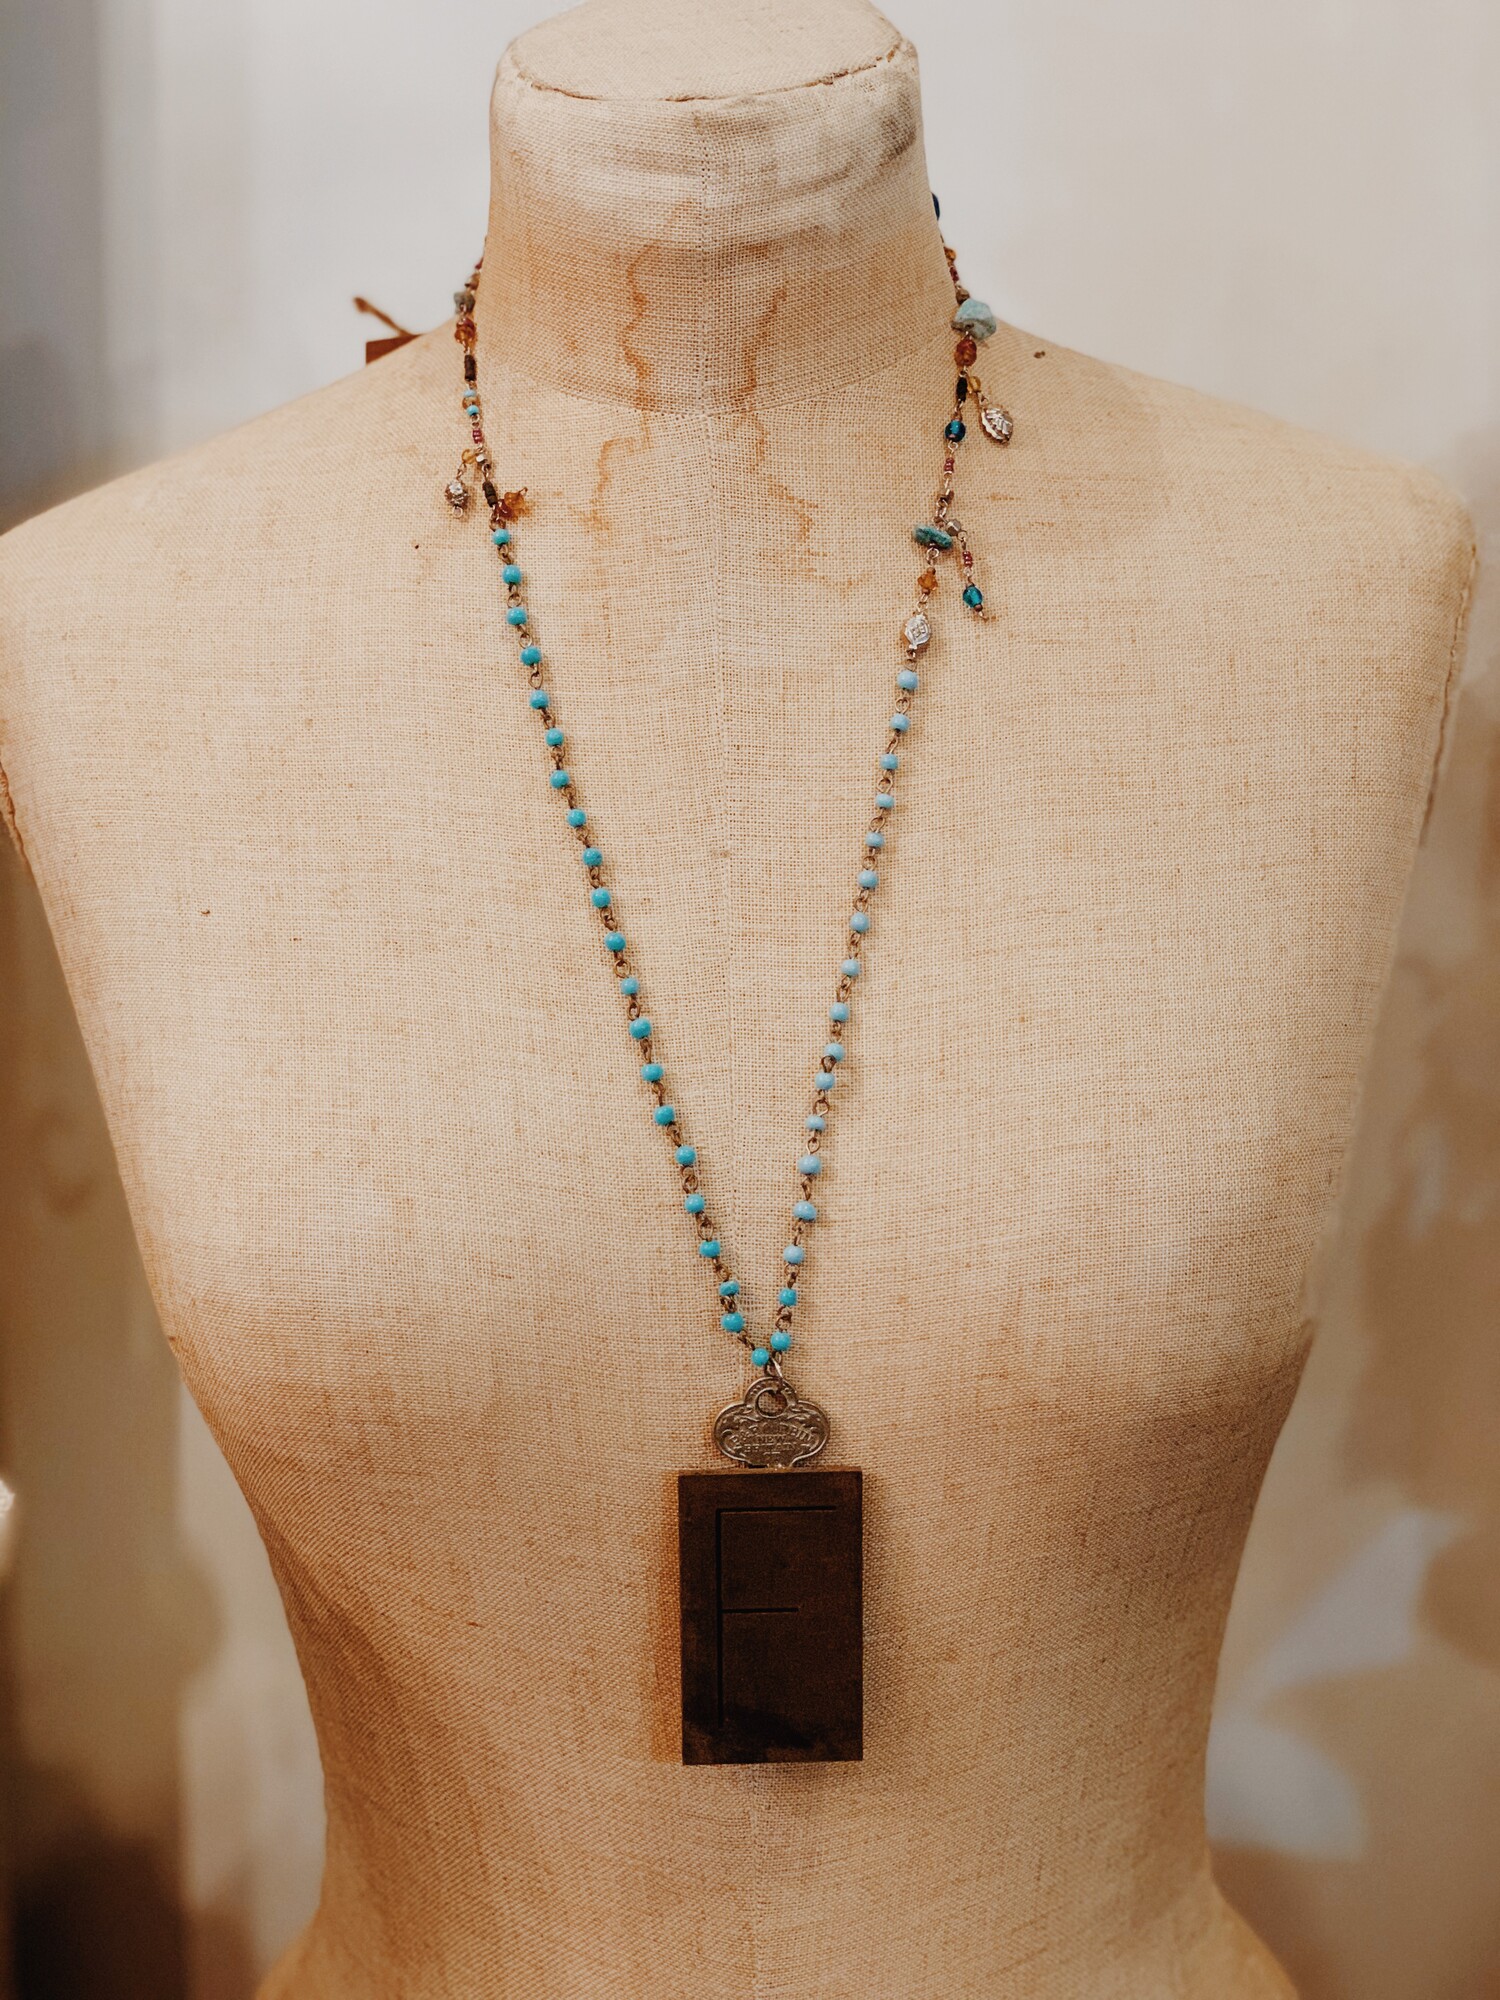 This beautiful necklace was handcrafted and is strung on a 27 inch chain with a 2 inch extender.